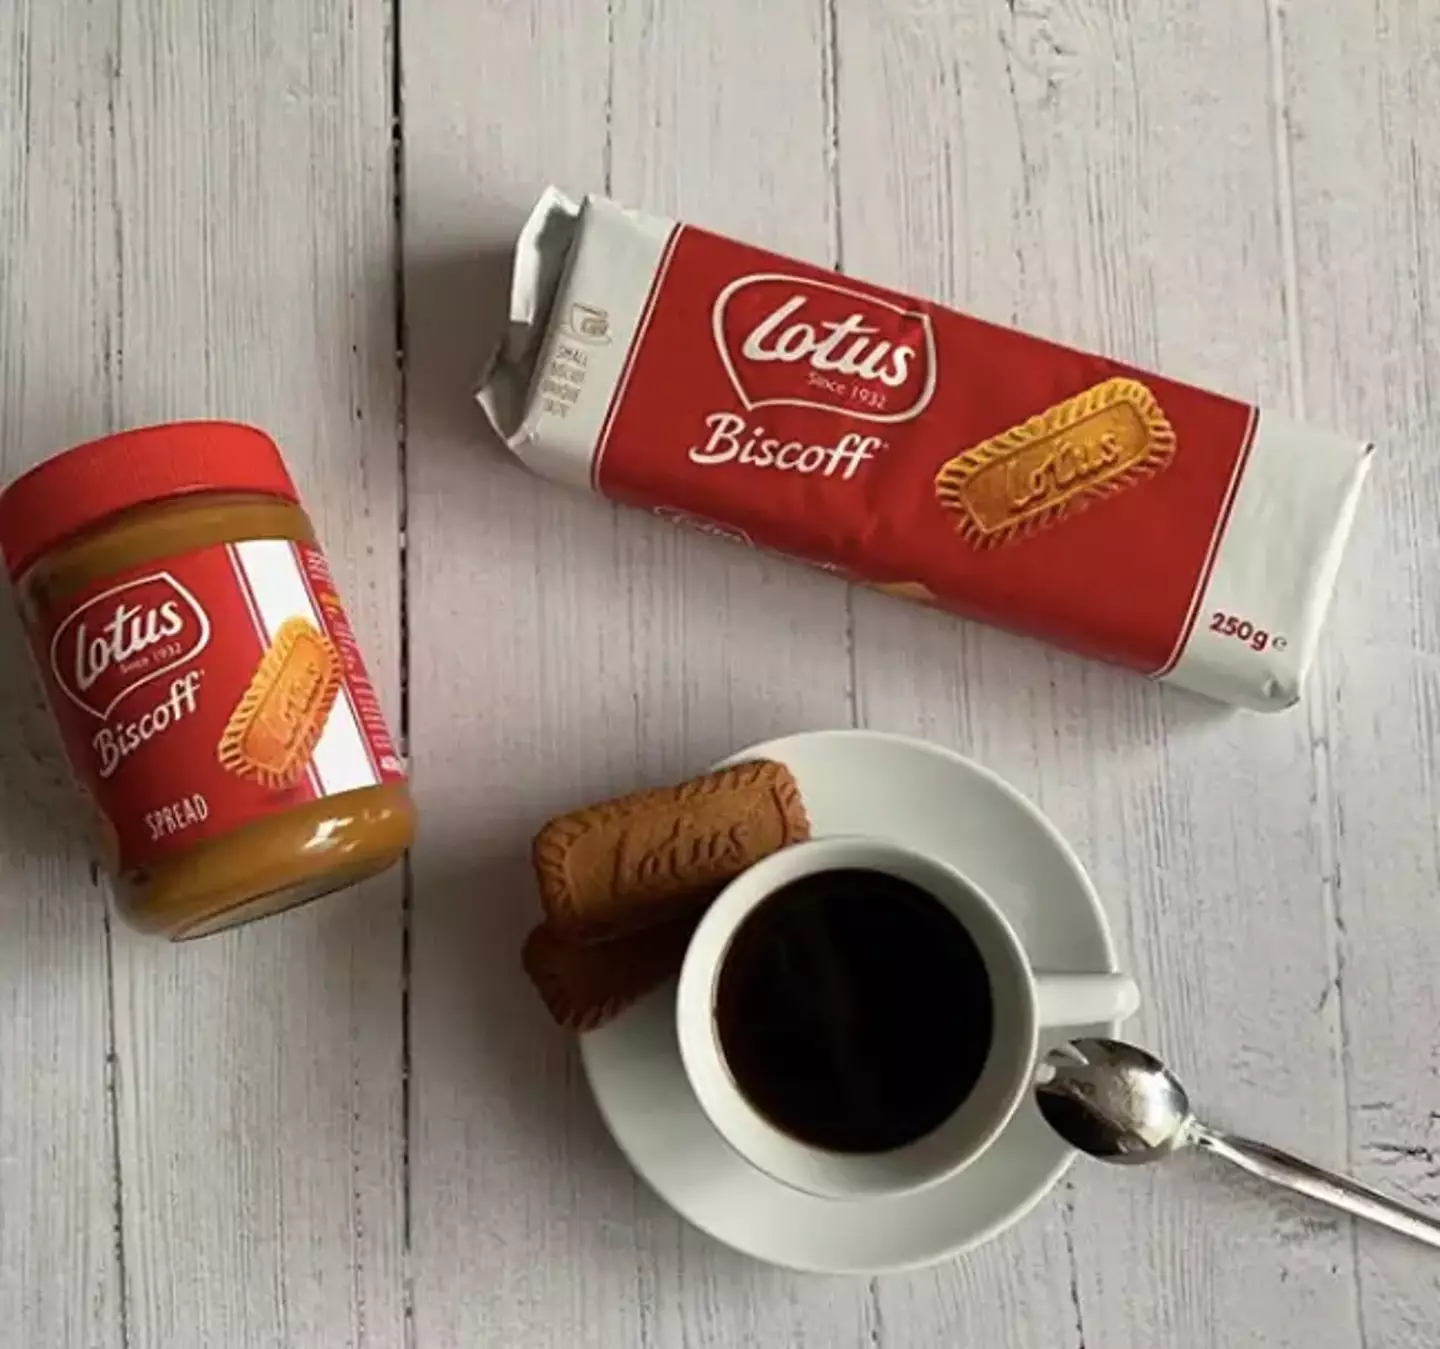 We have a real obsession with Biscoff tbh (